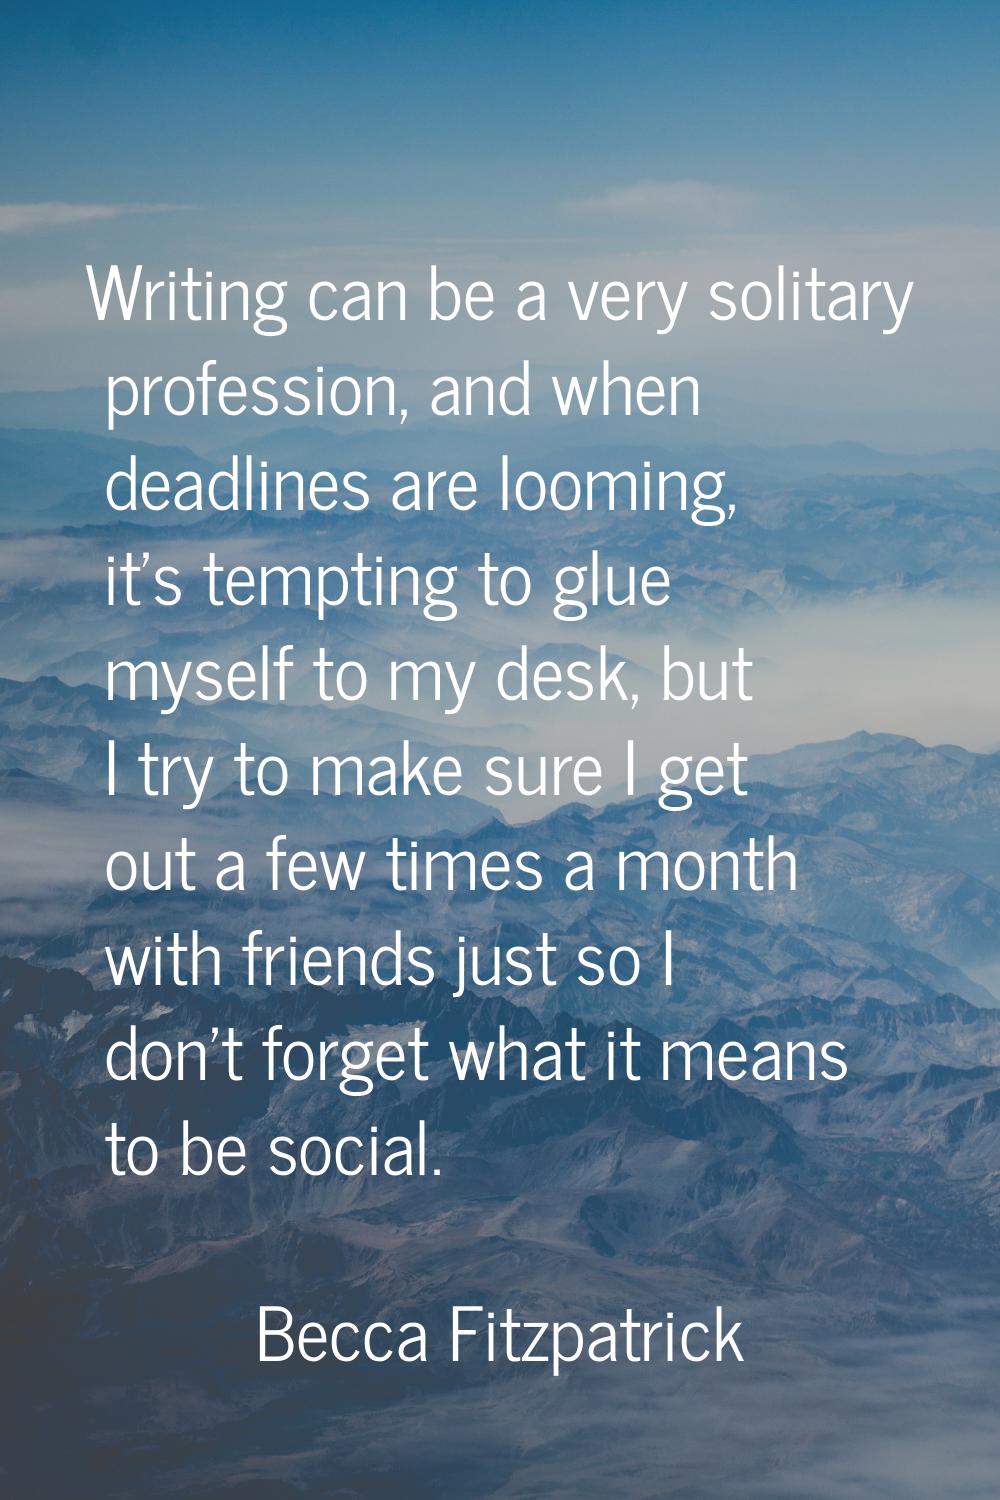 Writing can be a very solitary profession, and when deadlines are looming, it's tempting to glue my